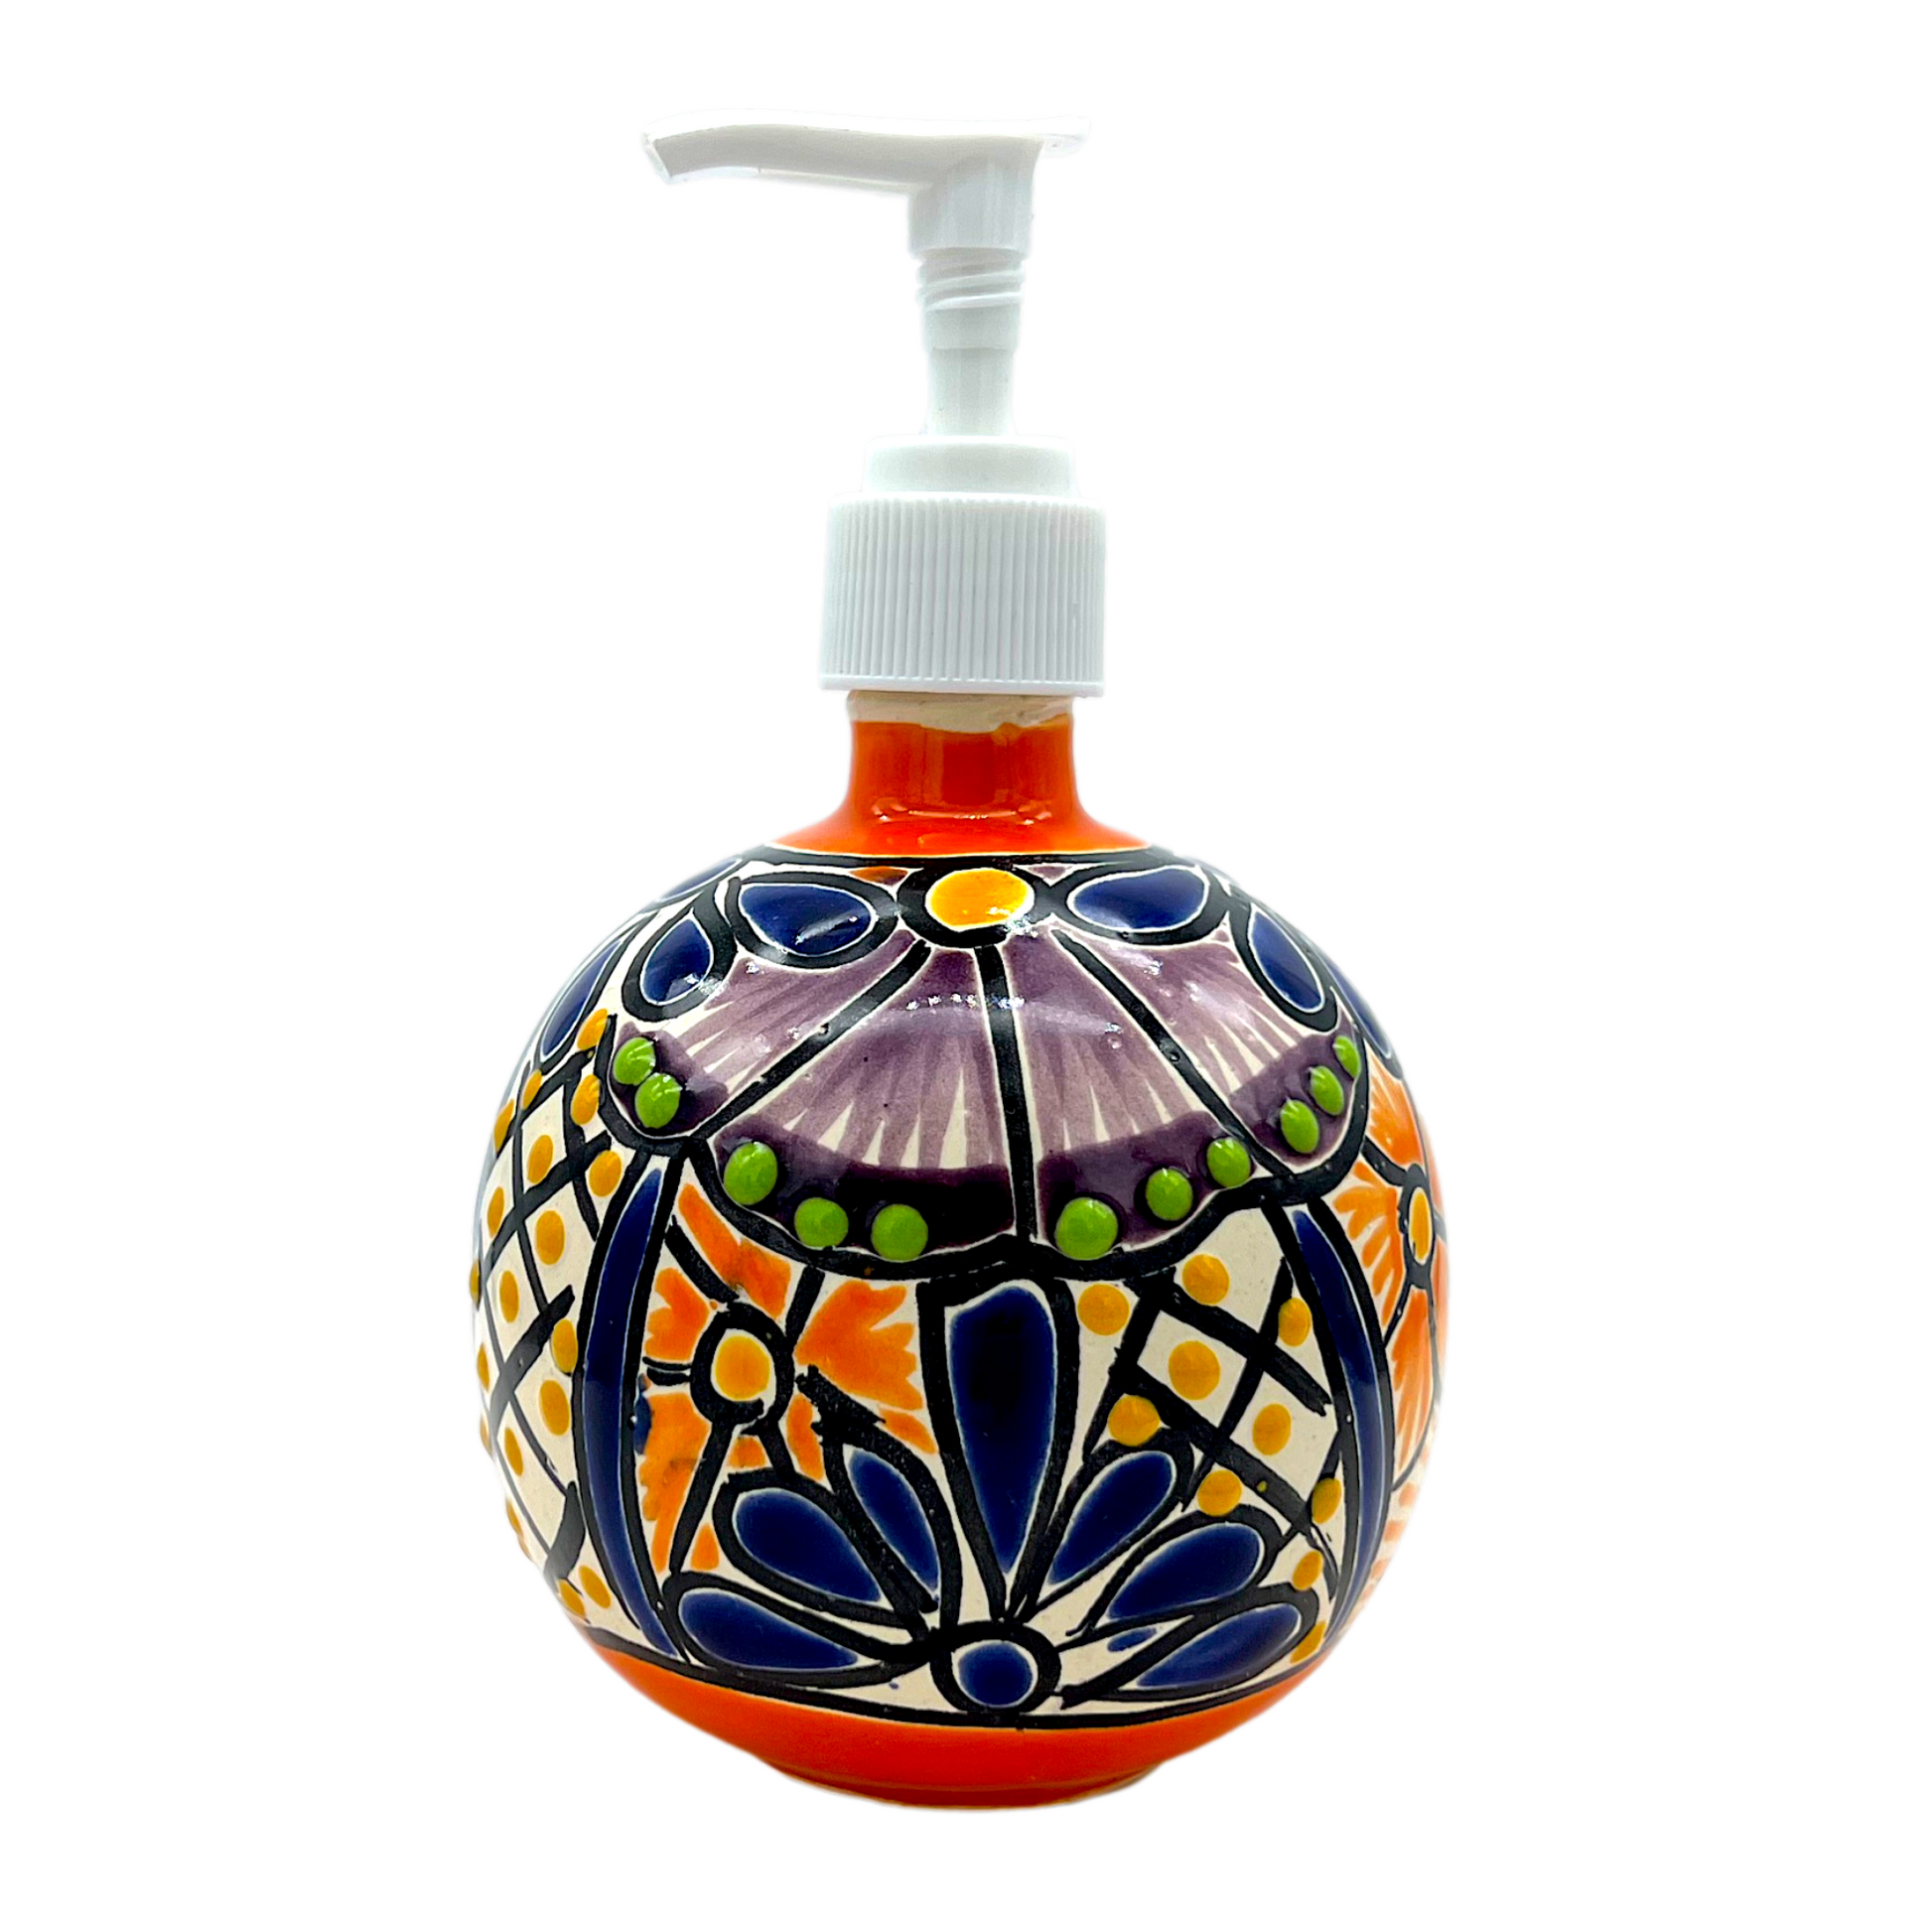 front of Hand-painted Talavera Ceramic Soap Dispenser in vibrant colors, an artistic addition to kitchen or bathroom.